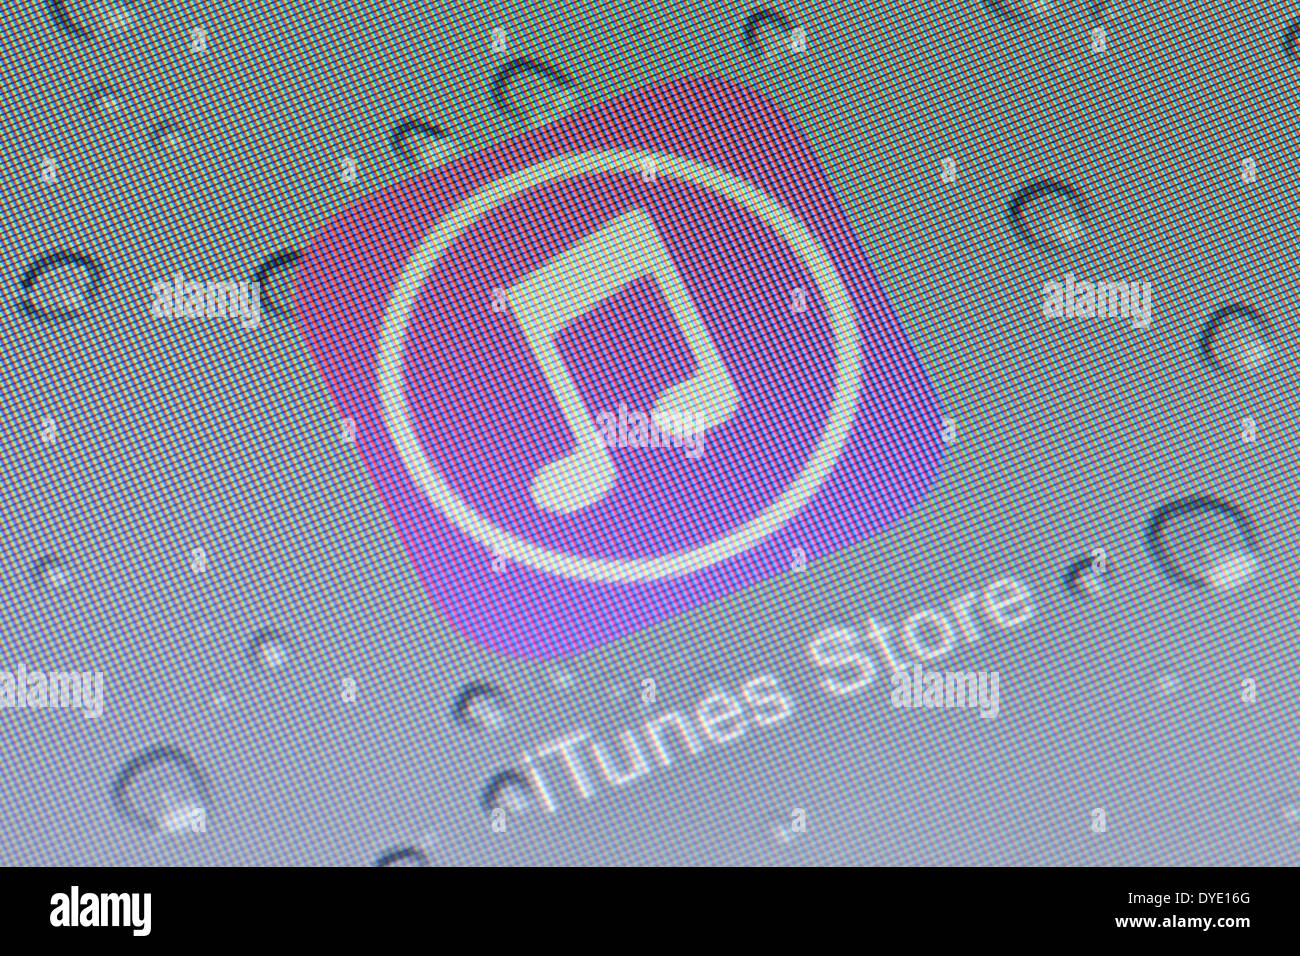 Close up of the Apple iTunes store app icon logo on an iPad, UK Stock Photo